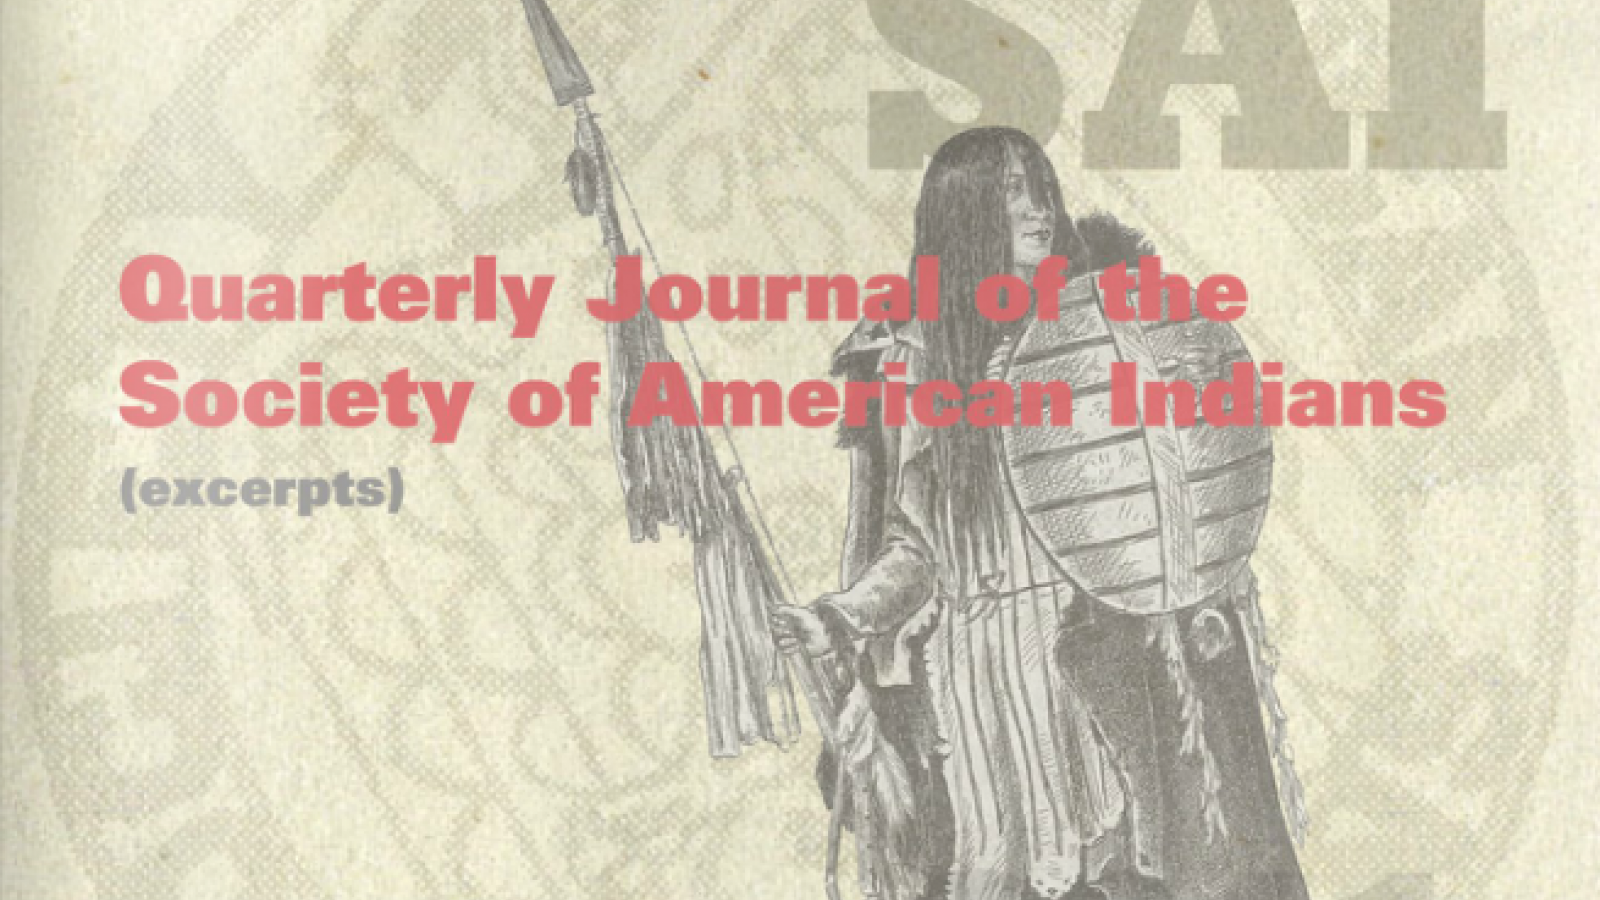 Quarterly Journal of the Society of American Indians, Image 1